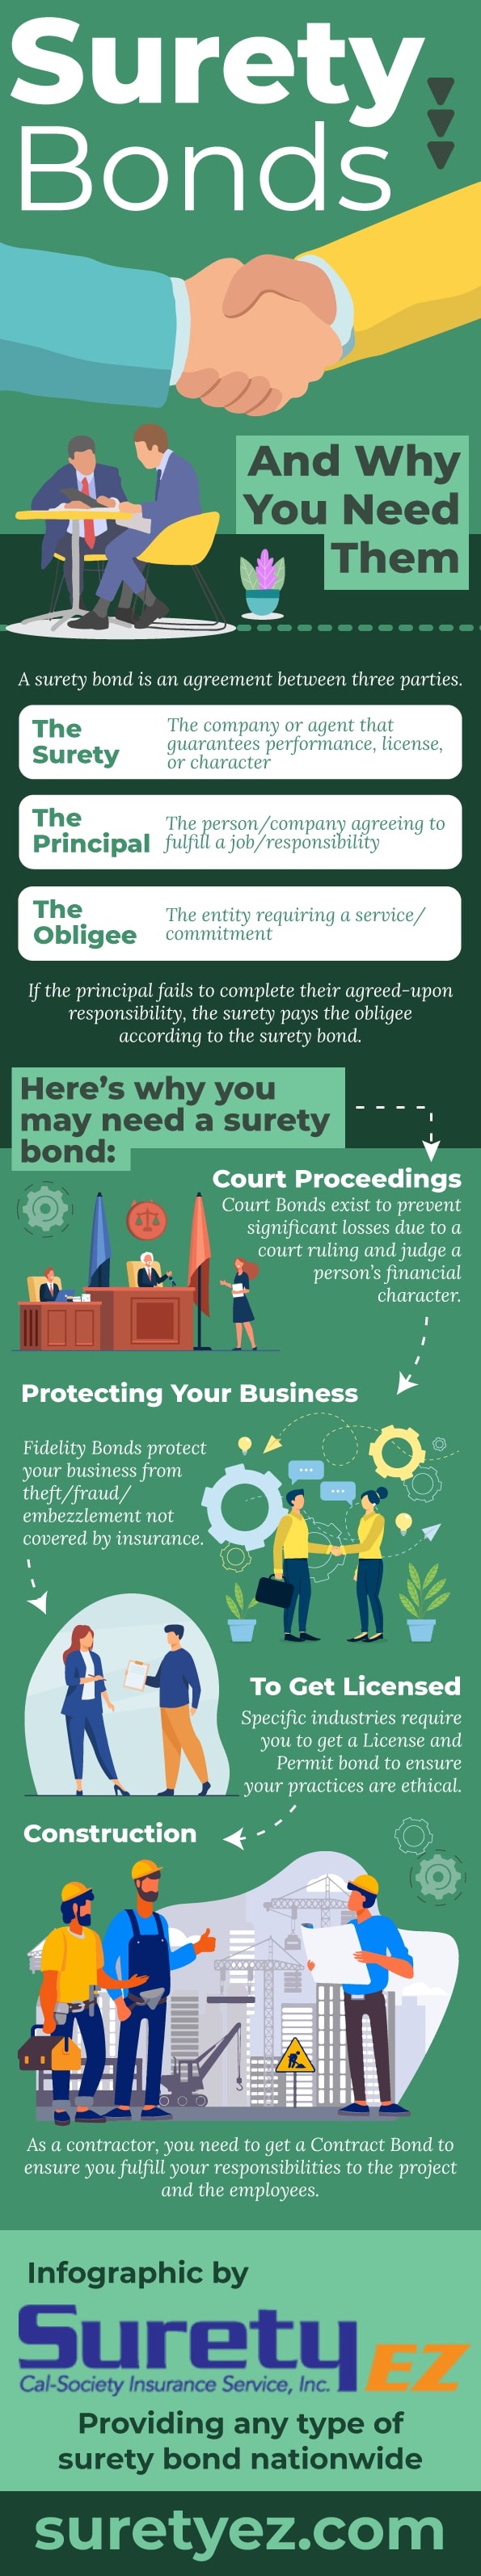 Surety Bonds And Why You Need Them